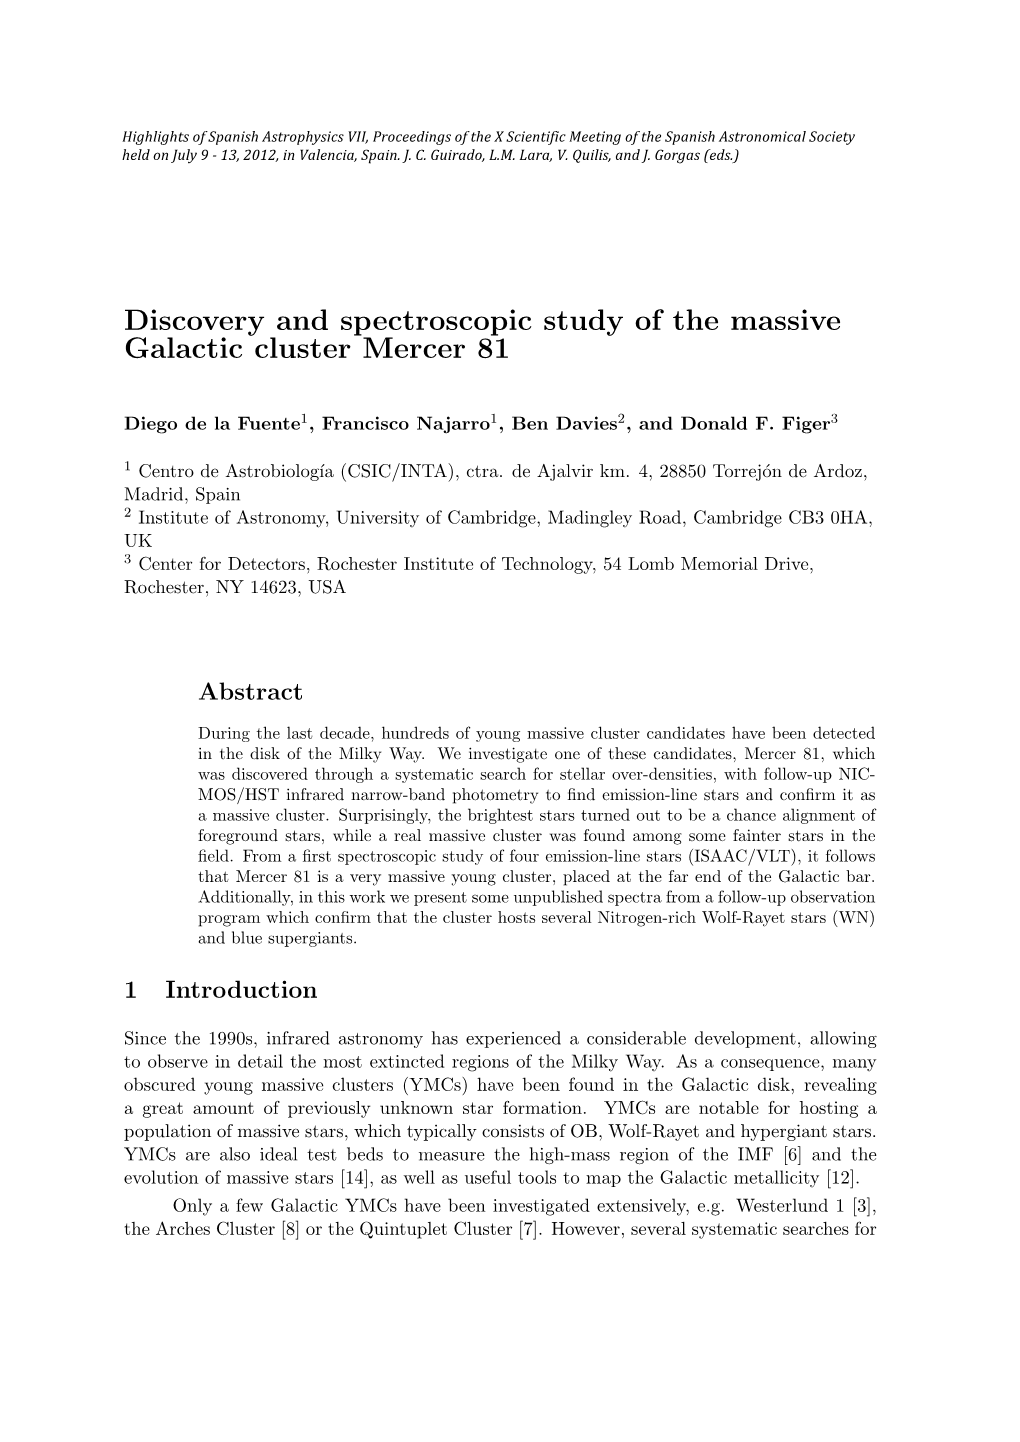 Discovery and Spectroscopic Study of the Massive Galactic Cluster Mercer 81